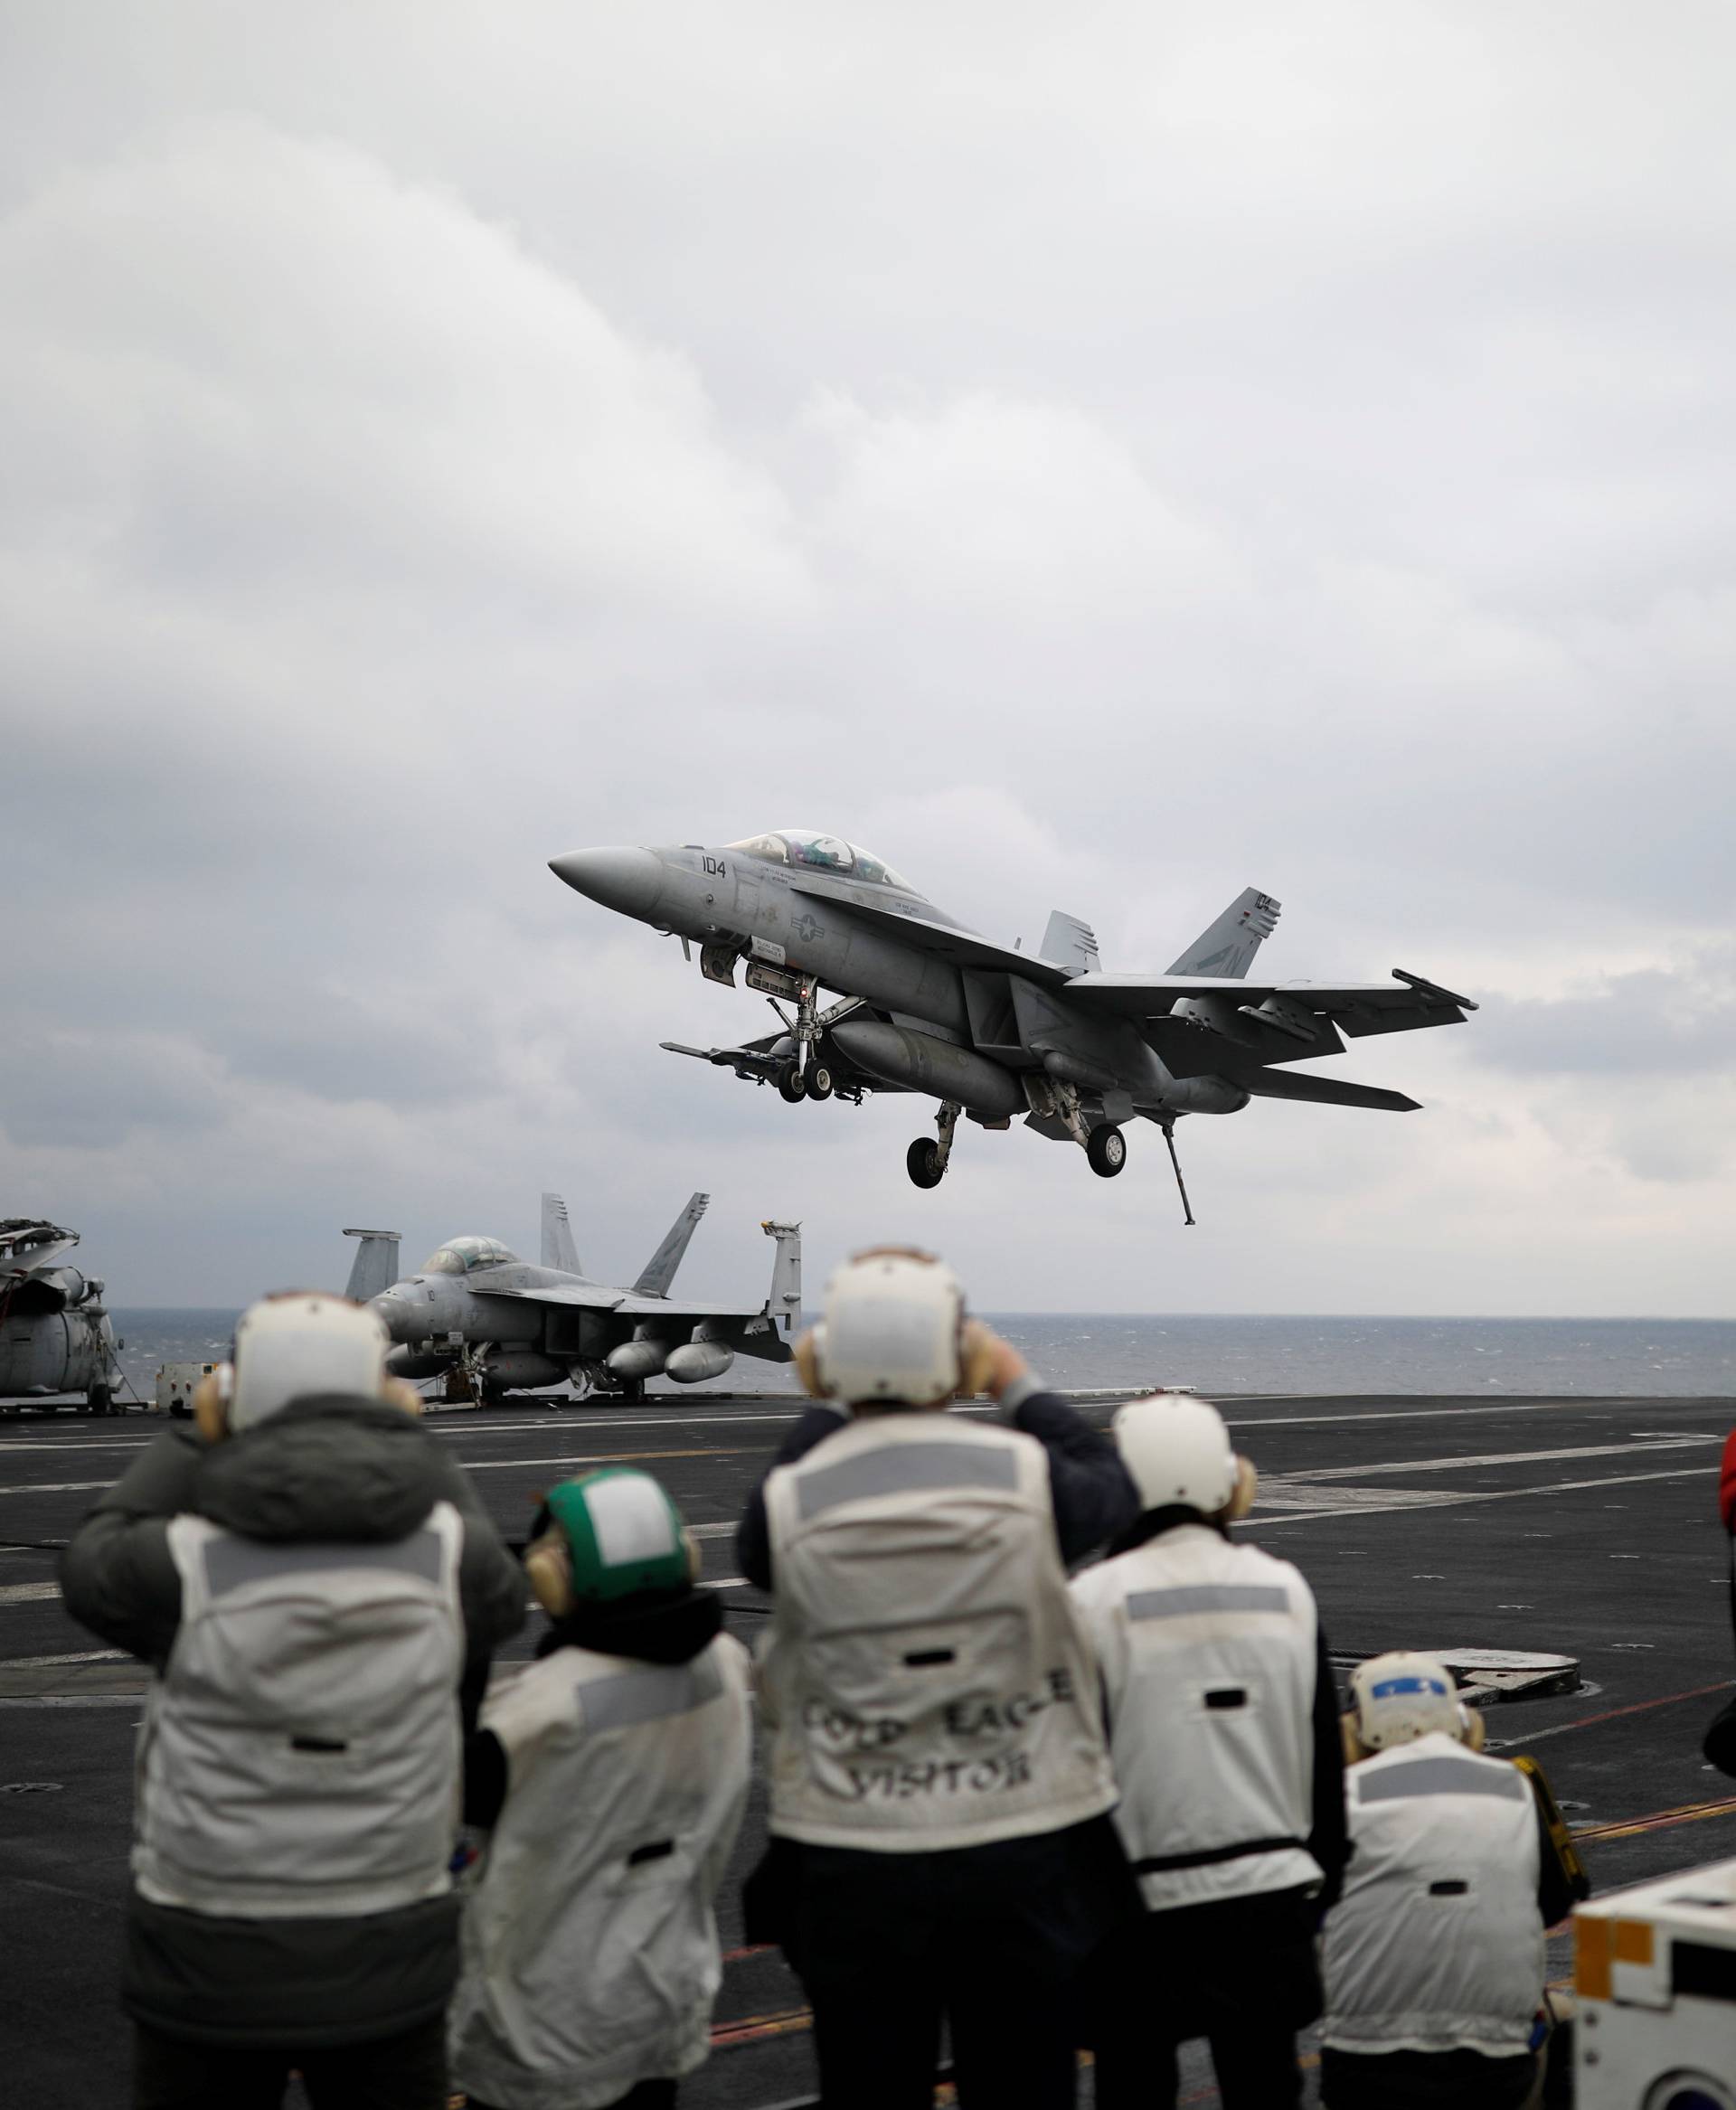 A U.S. F18 fighter jet lands on the deck of U.S. aircraft carrier USS Carl Vinson during an annual joint military exercise called "Foal Eagle" between South Korea and U.S., in the East Sea